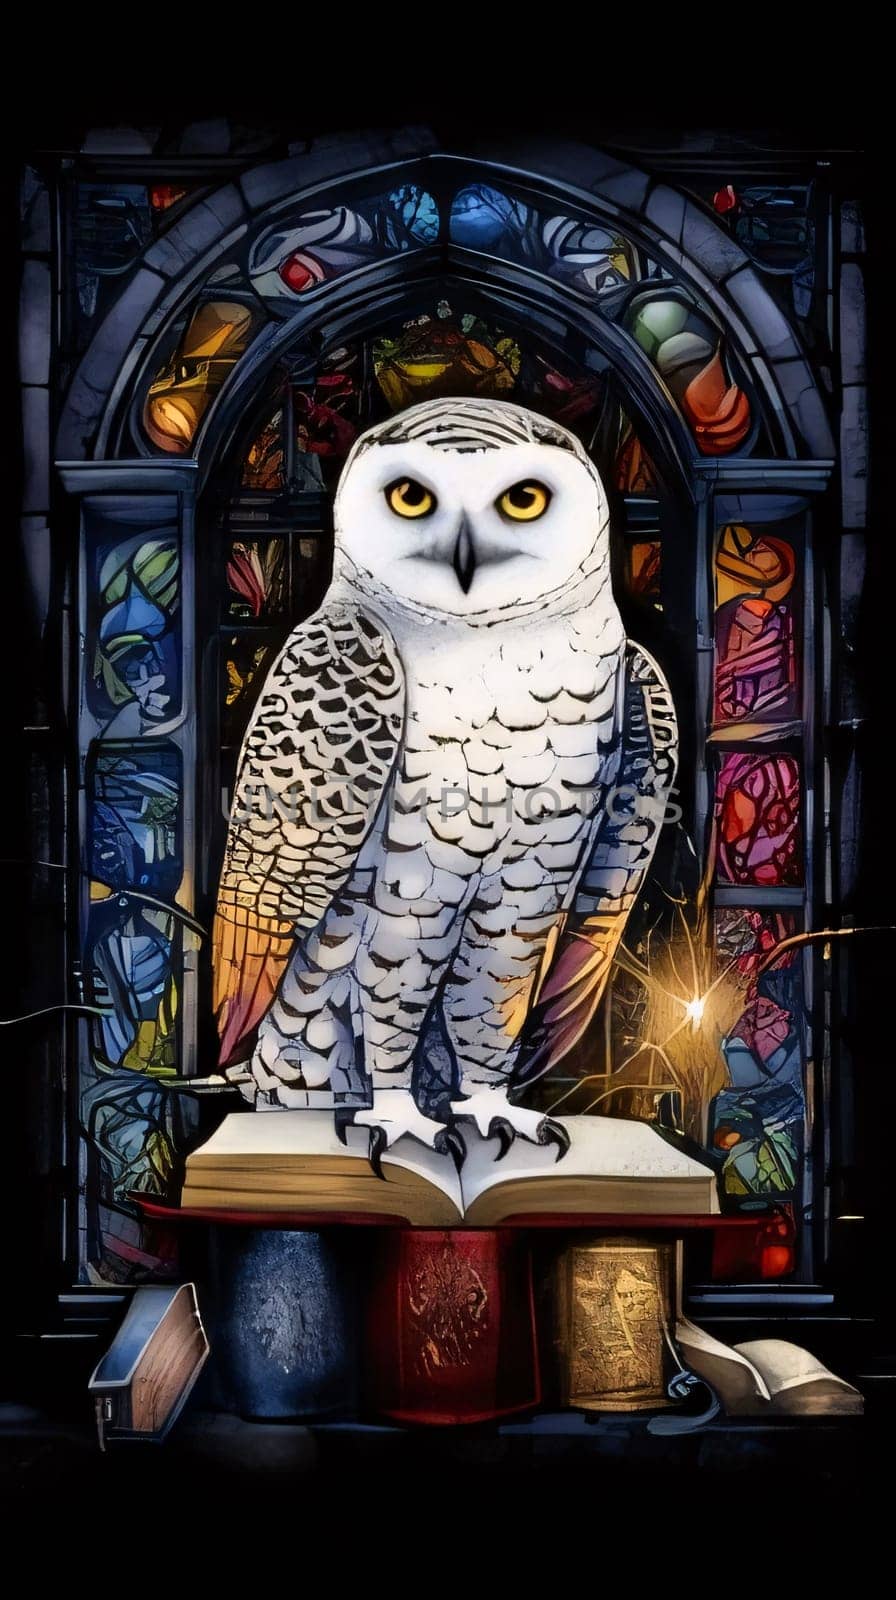 World Book Day: Owl sitting on a book in front of a stained glass window